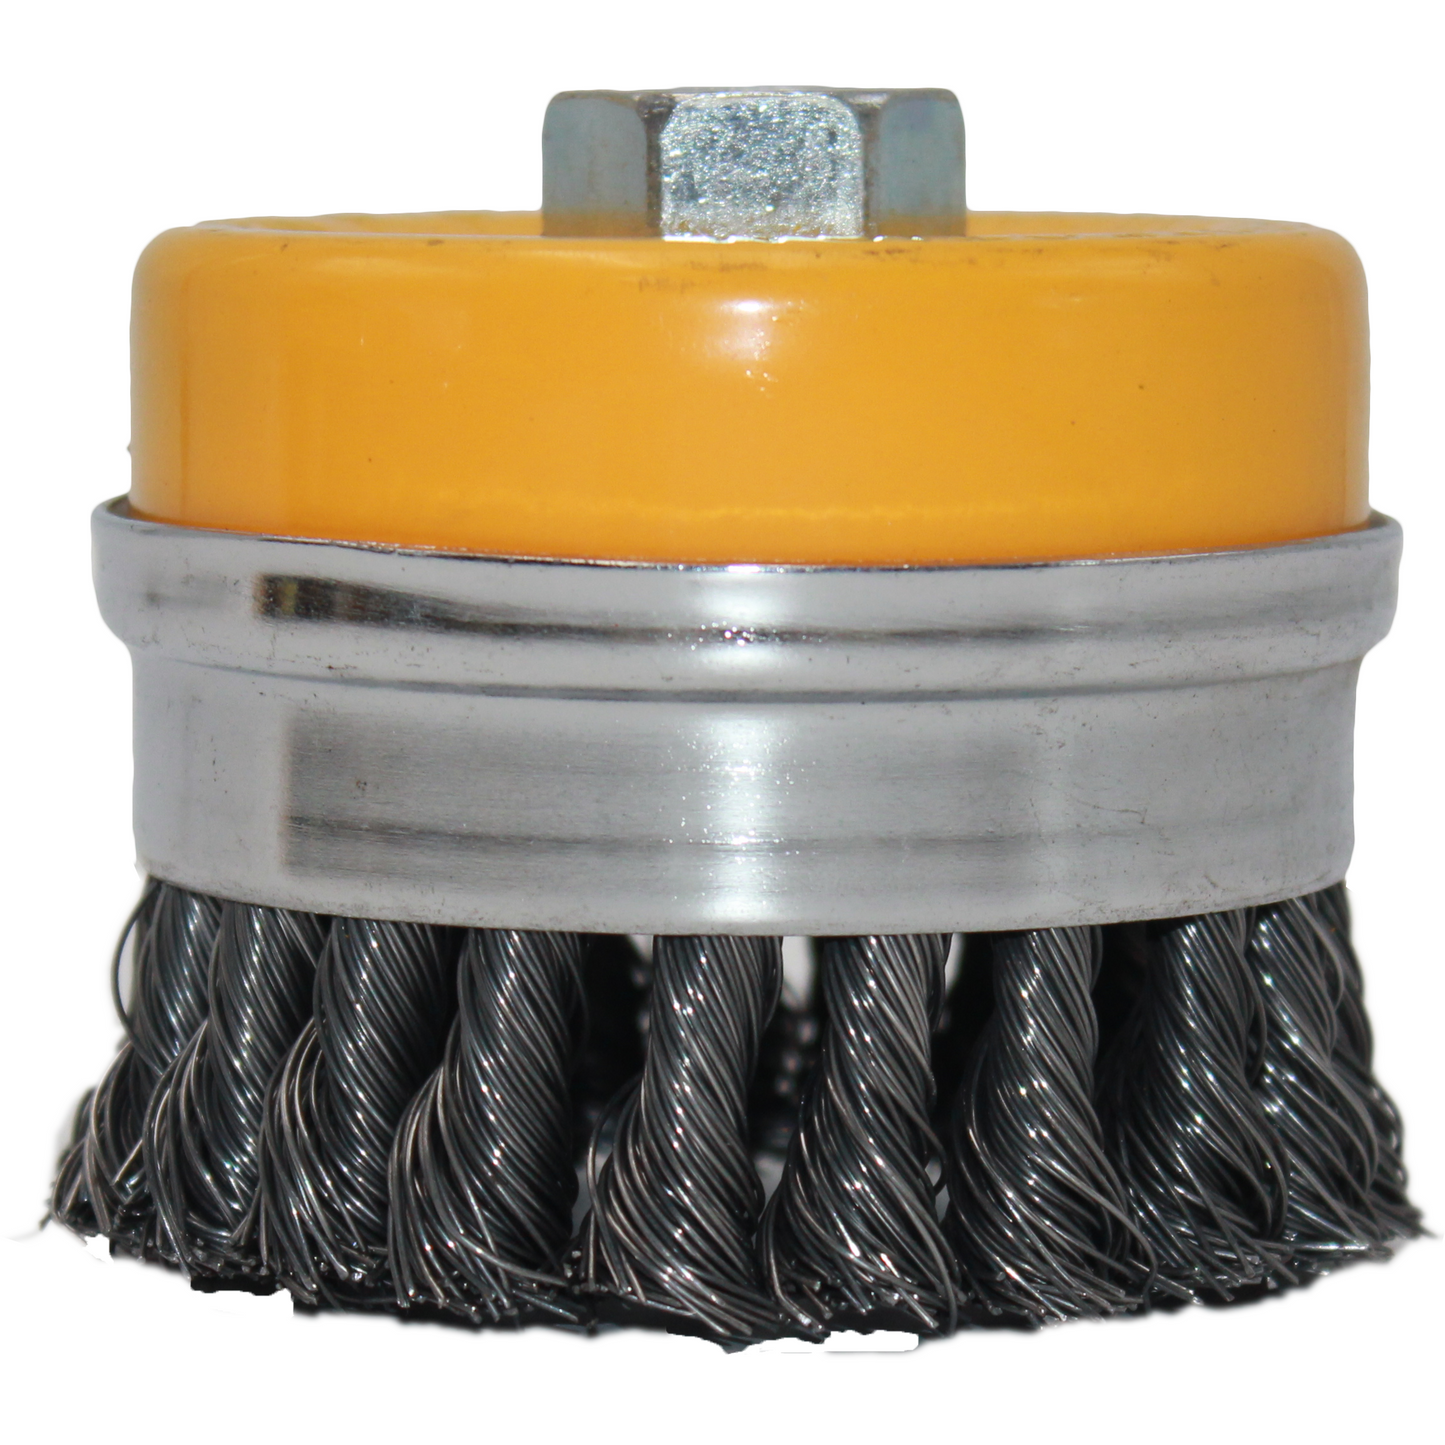 MEGA HARDWARE -  CUP TWIST WIRE BRUSH WITH NUT (HEAVY DUTY)